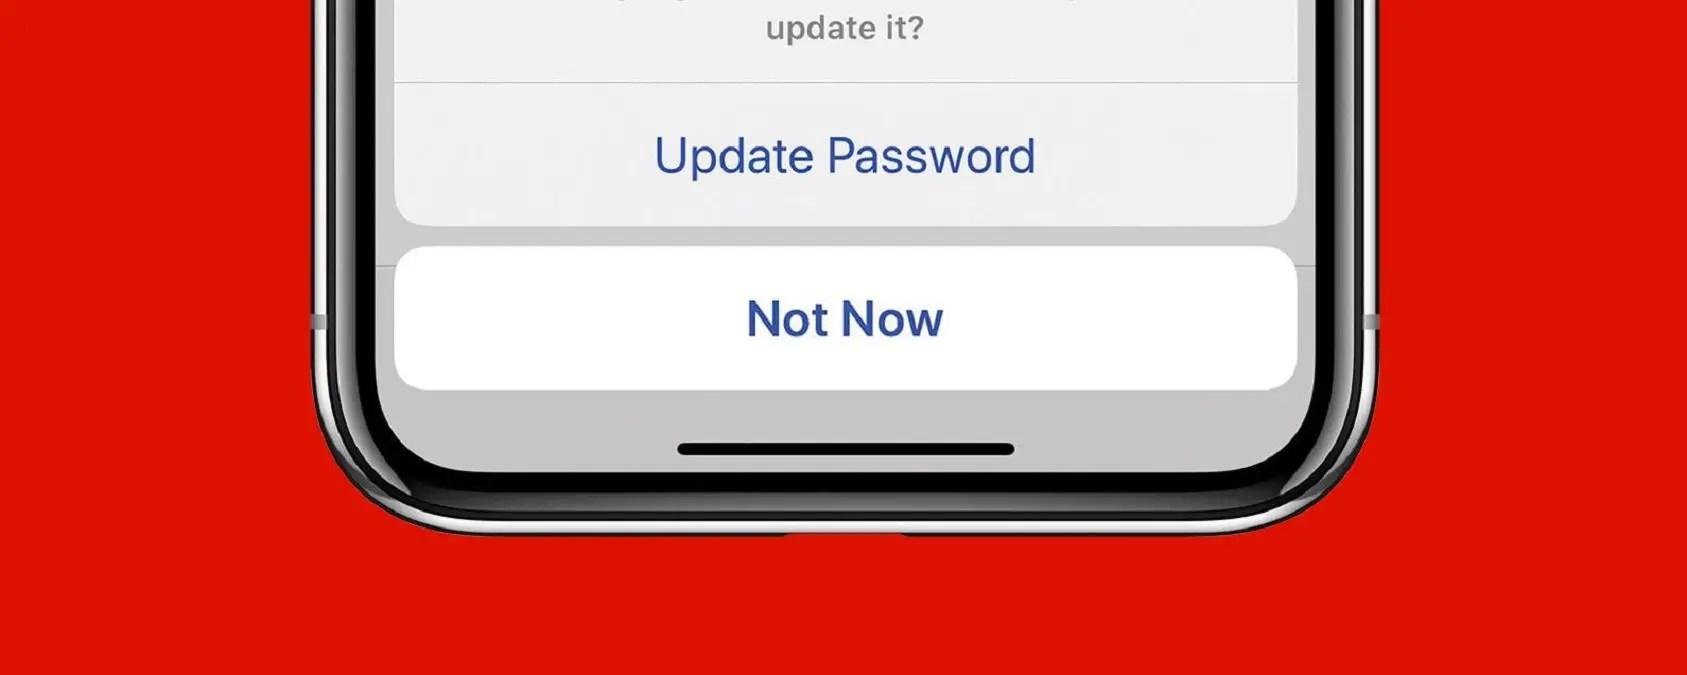 How to Change an Email Password on iPhone & iPad